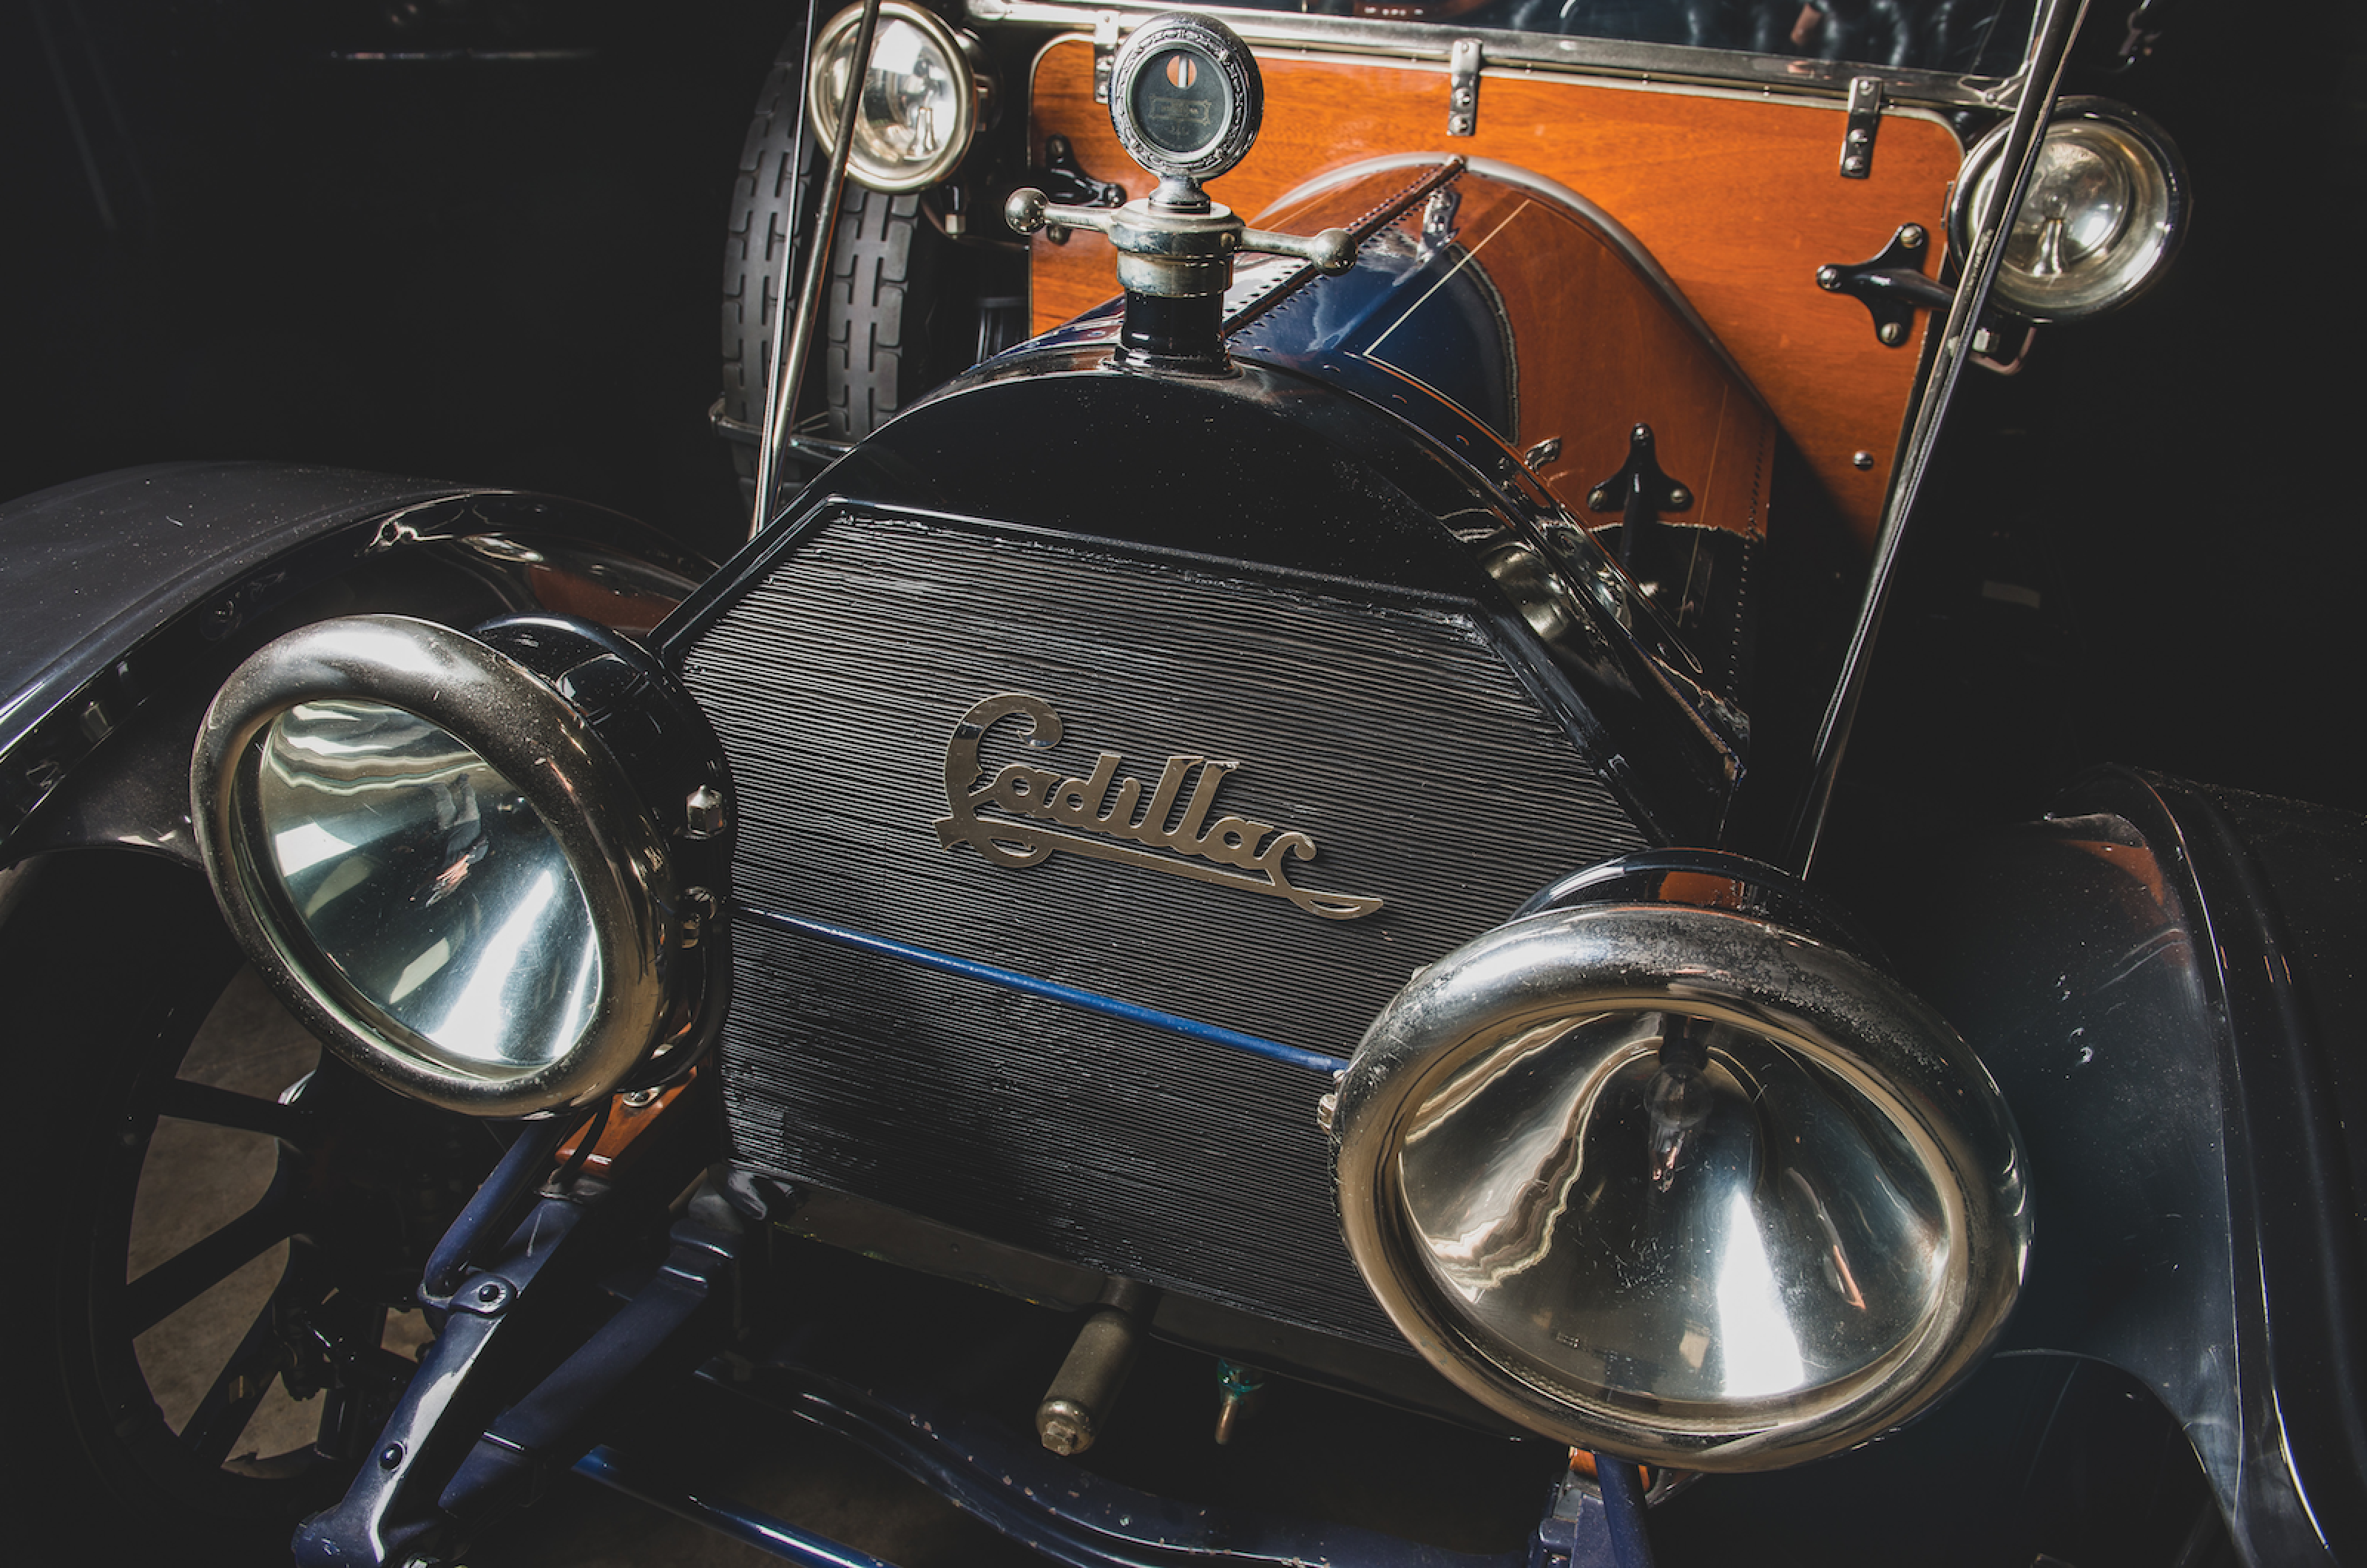 <p>Apparently, Cadillac founder Henry M Leland was spurred on by the tragic tale to fit electric starters to its cars, starting in 1912.</p>  <p>Charles Kettering’s Delco company created a starter unit for Cadillac that could replace the starting handle and produced a current for lights and ignition. </p>